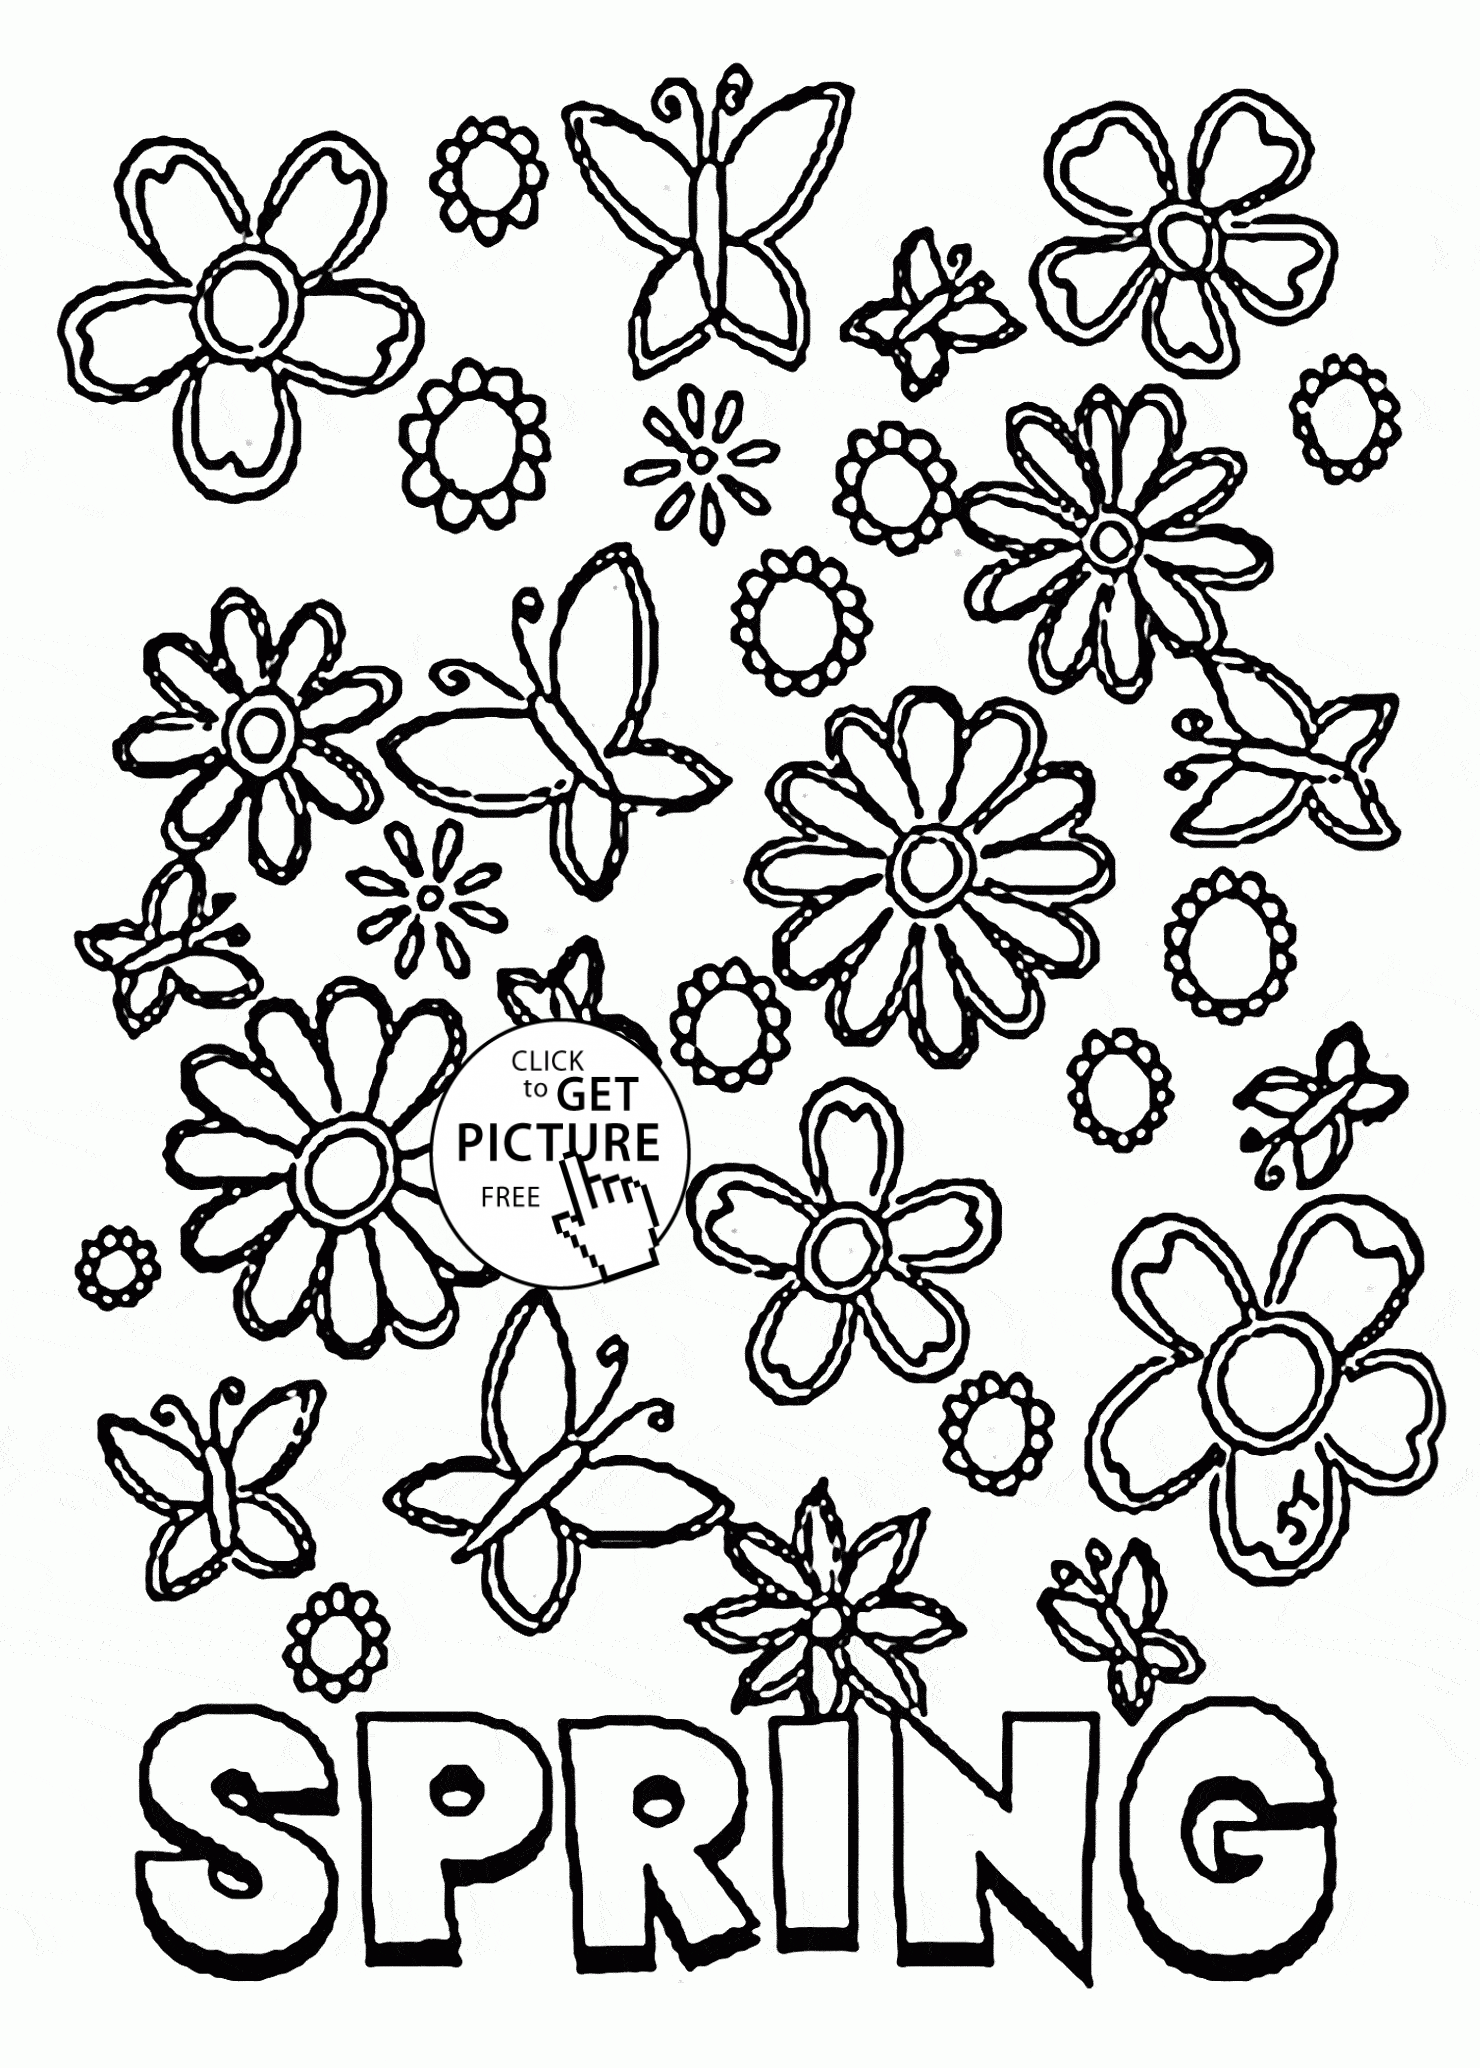 Spring Flowers Free Coloring Pages Pin on Coloring Pages / Free